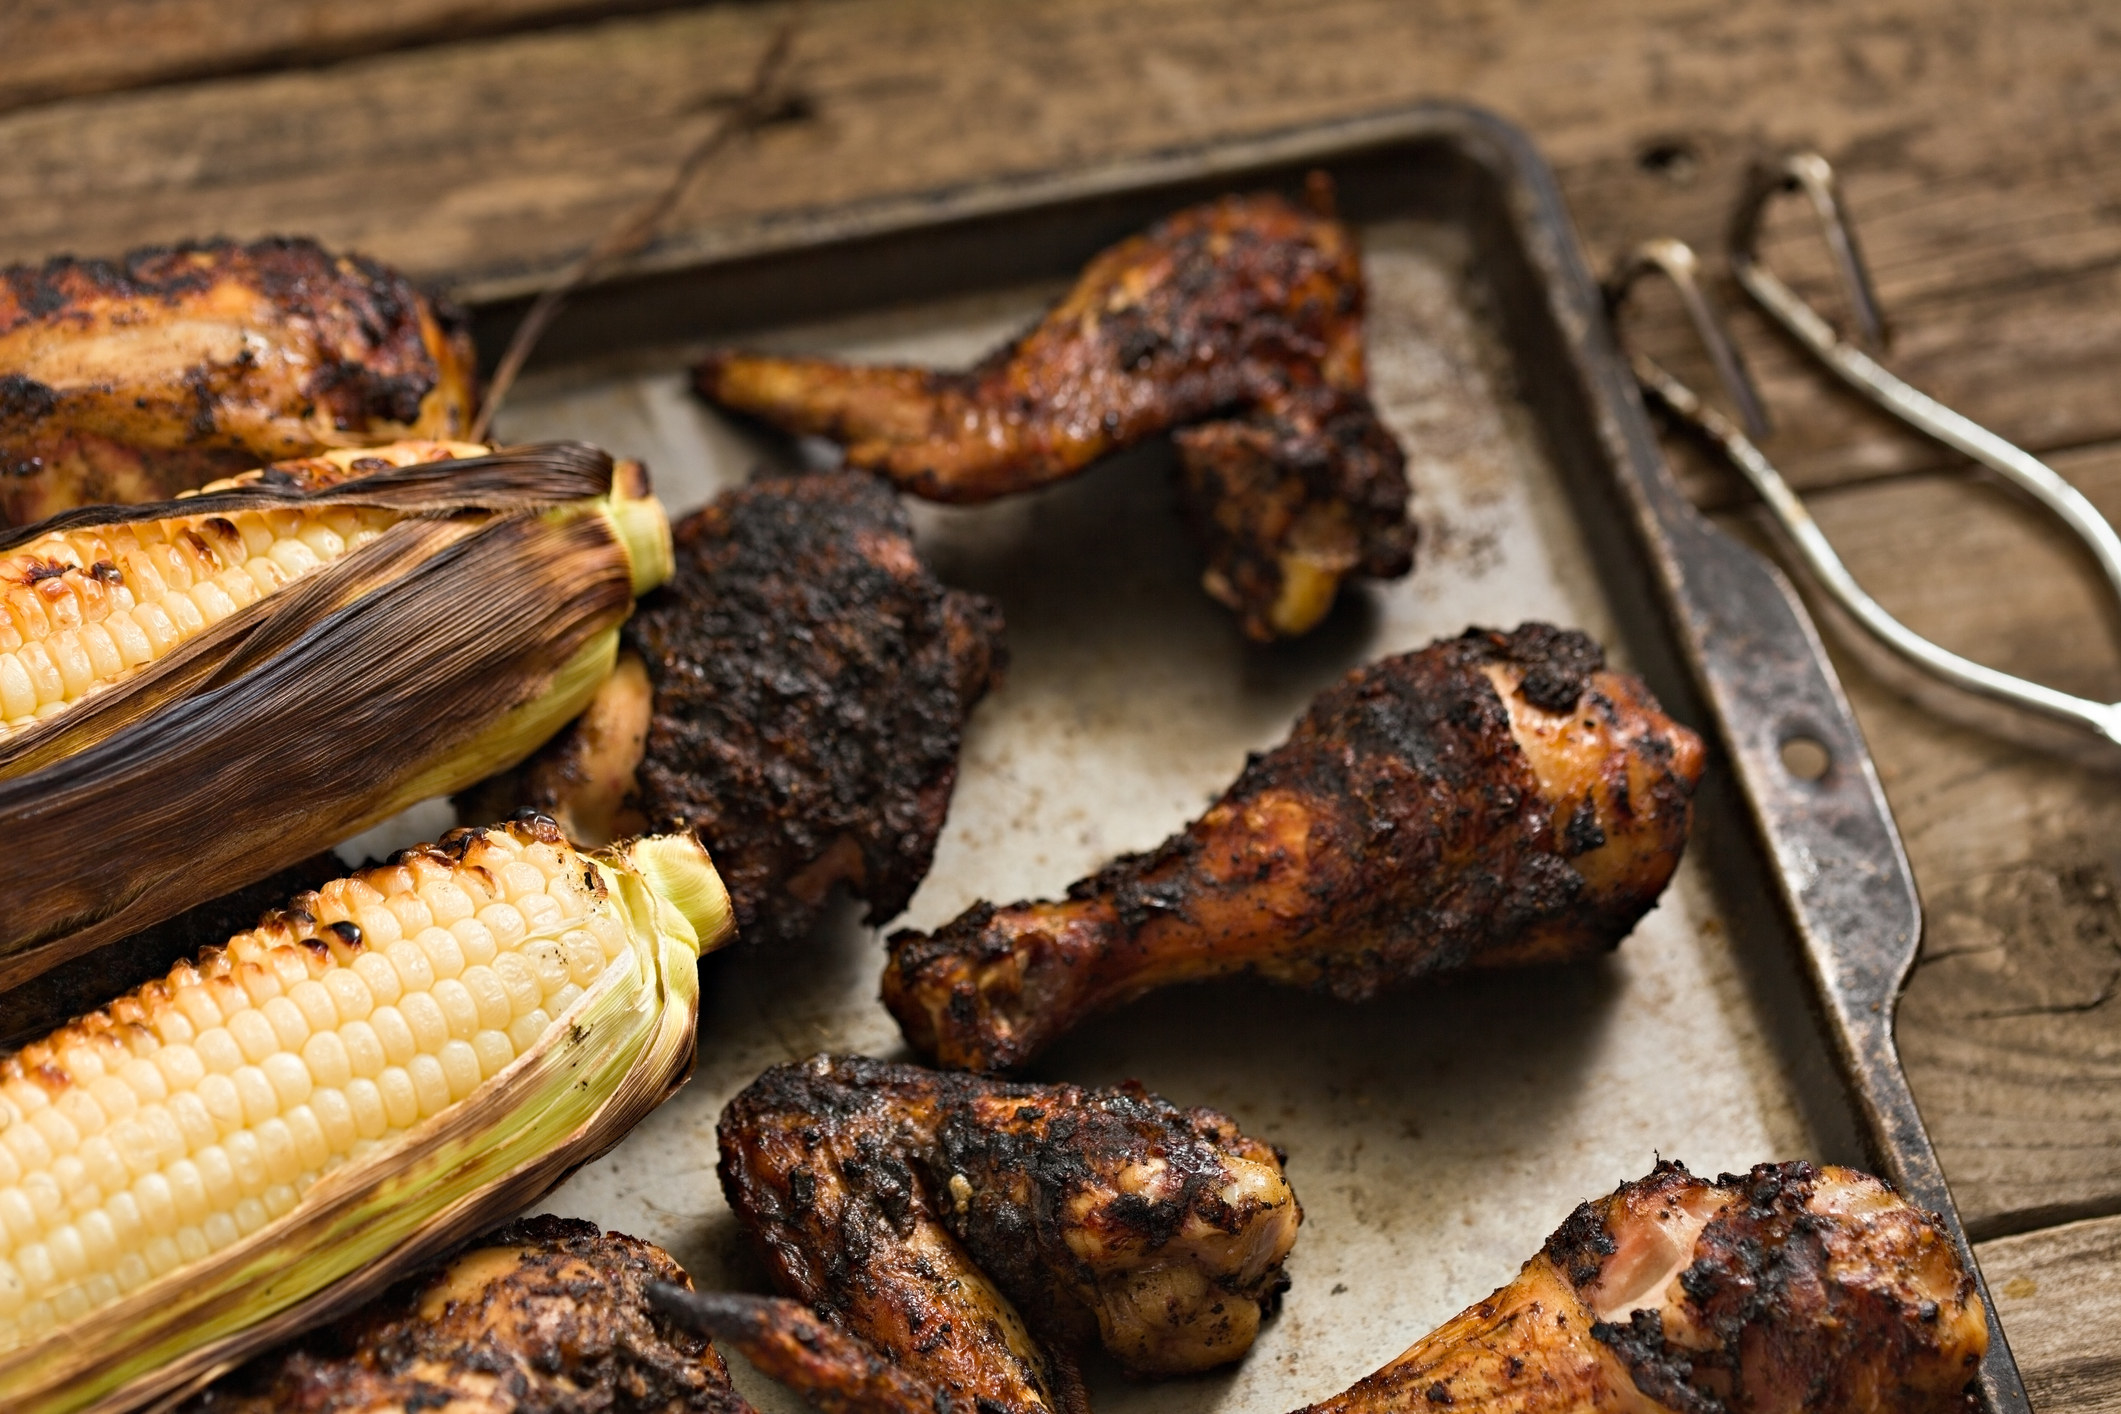 A plate of blackened chicken and corn on the cob.